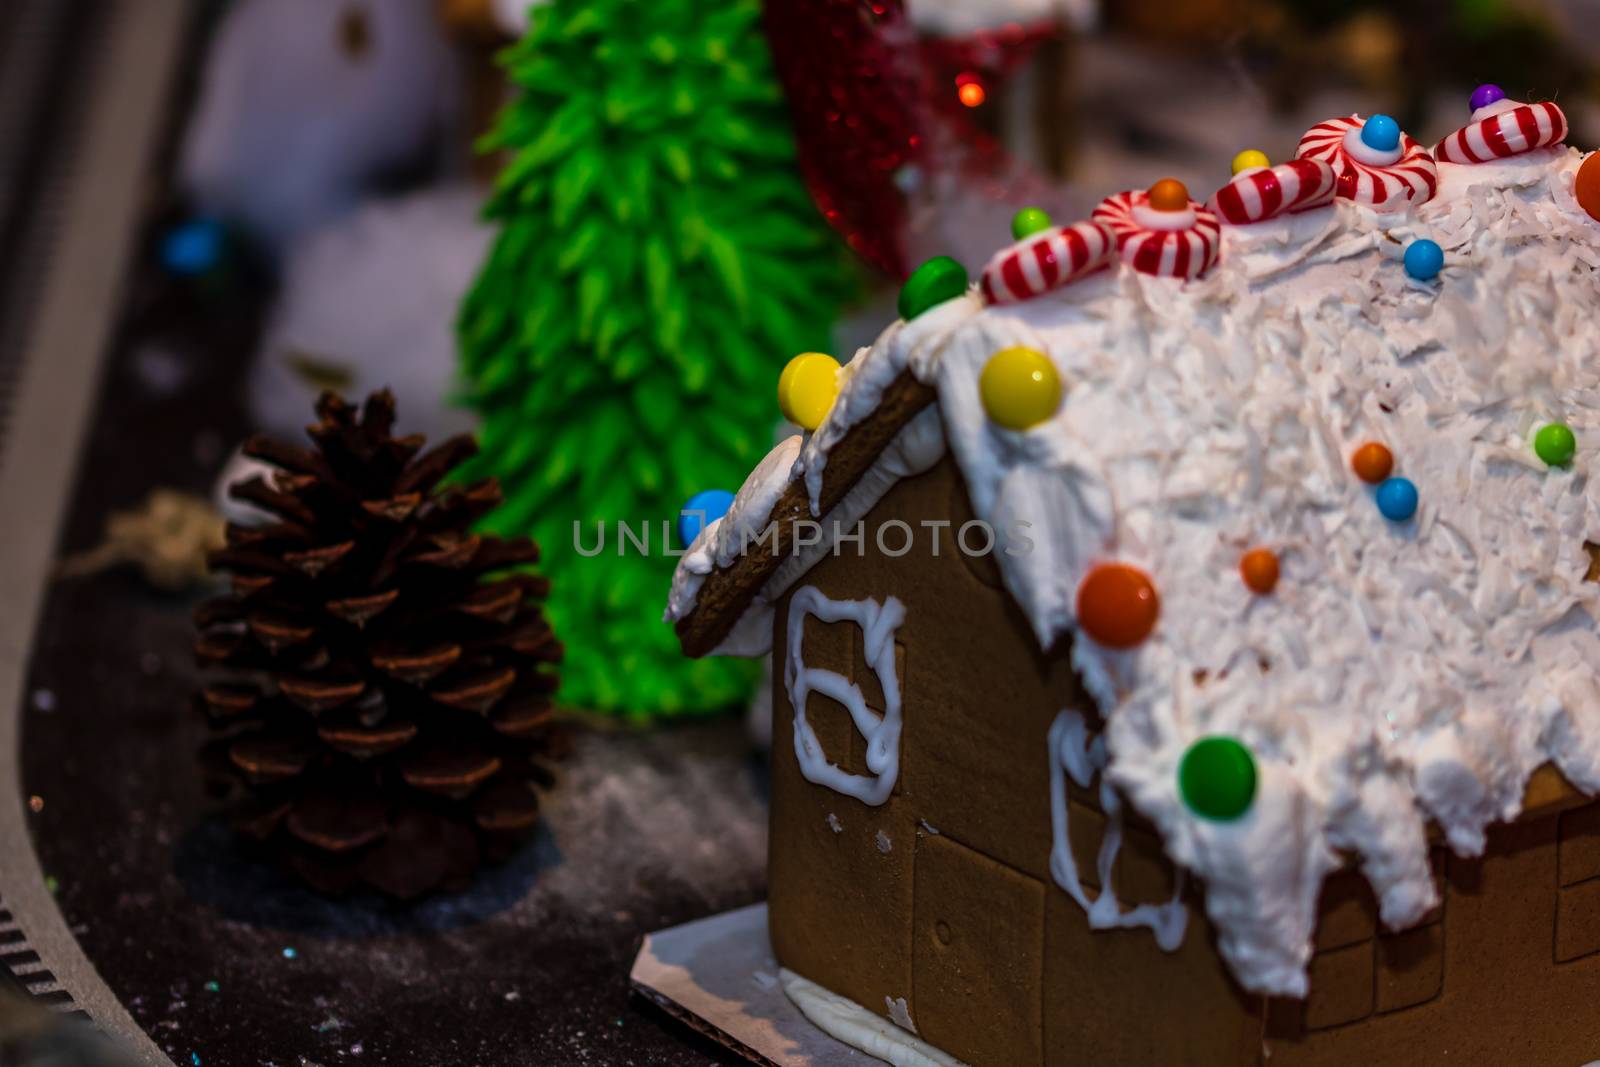 Colorful gingerbread house isolated on blurred background with Christmas decoration.